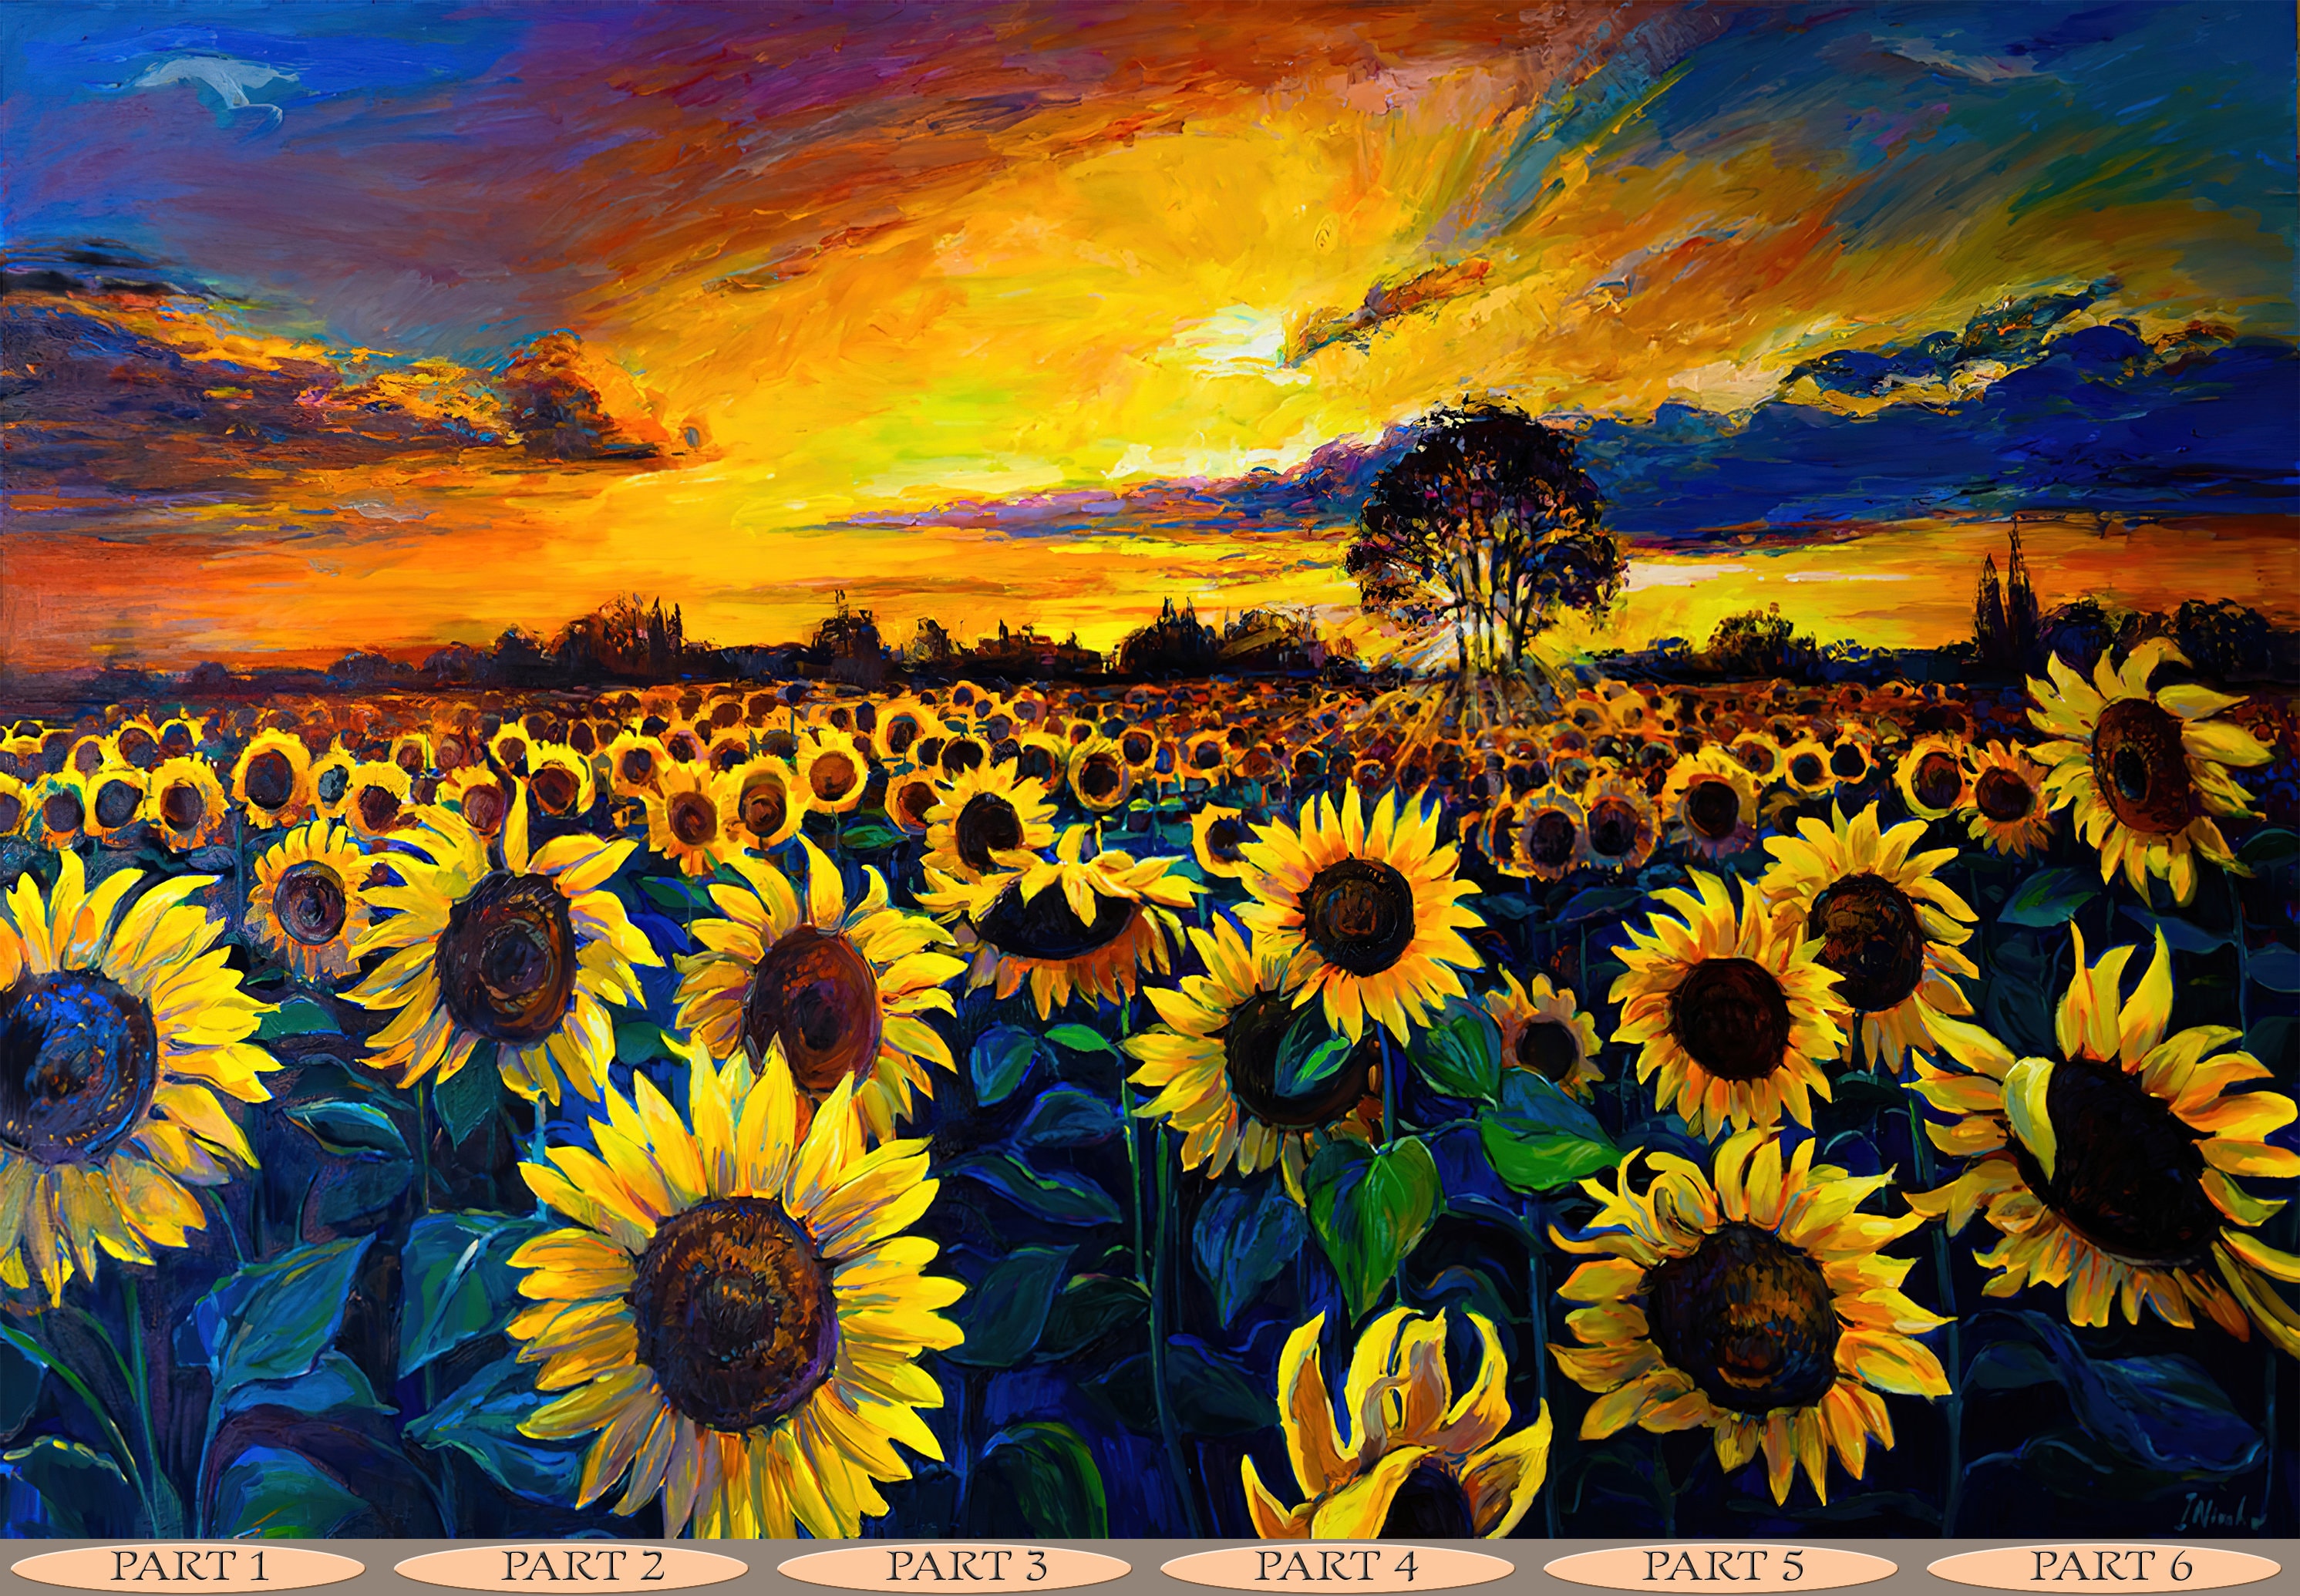 Fashionable Summer Illustration Modern Art Work My Original Oil Painting On  Canvas Still Life Two Blooming Large Yellow Sunflower Against The  Background Of Green Stalks Of Plants And A Bright Blue Sky